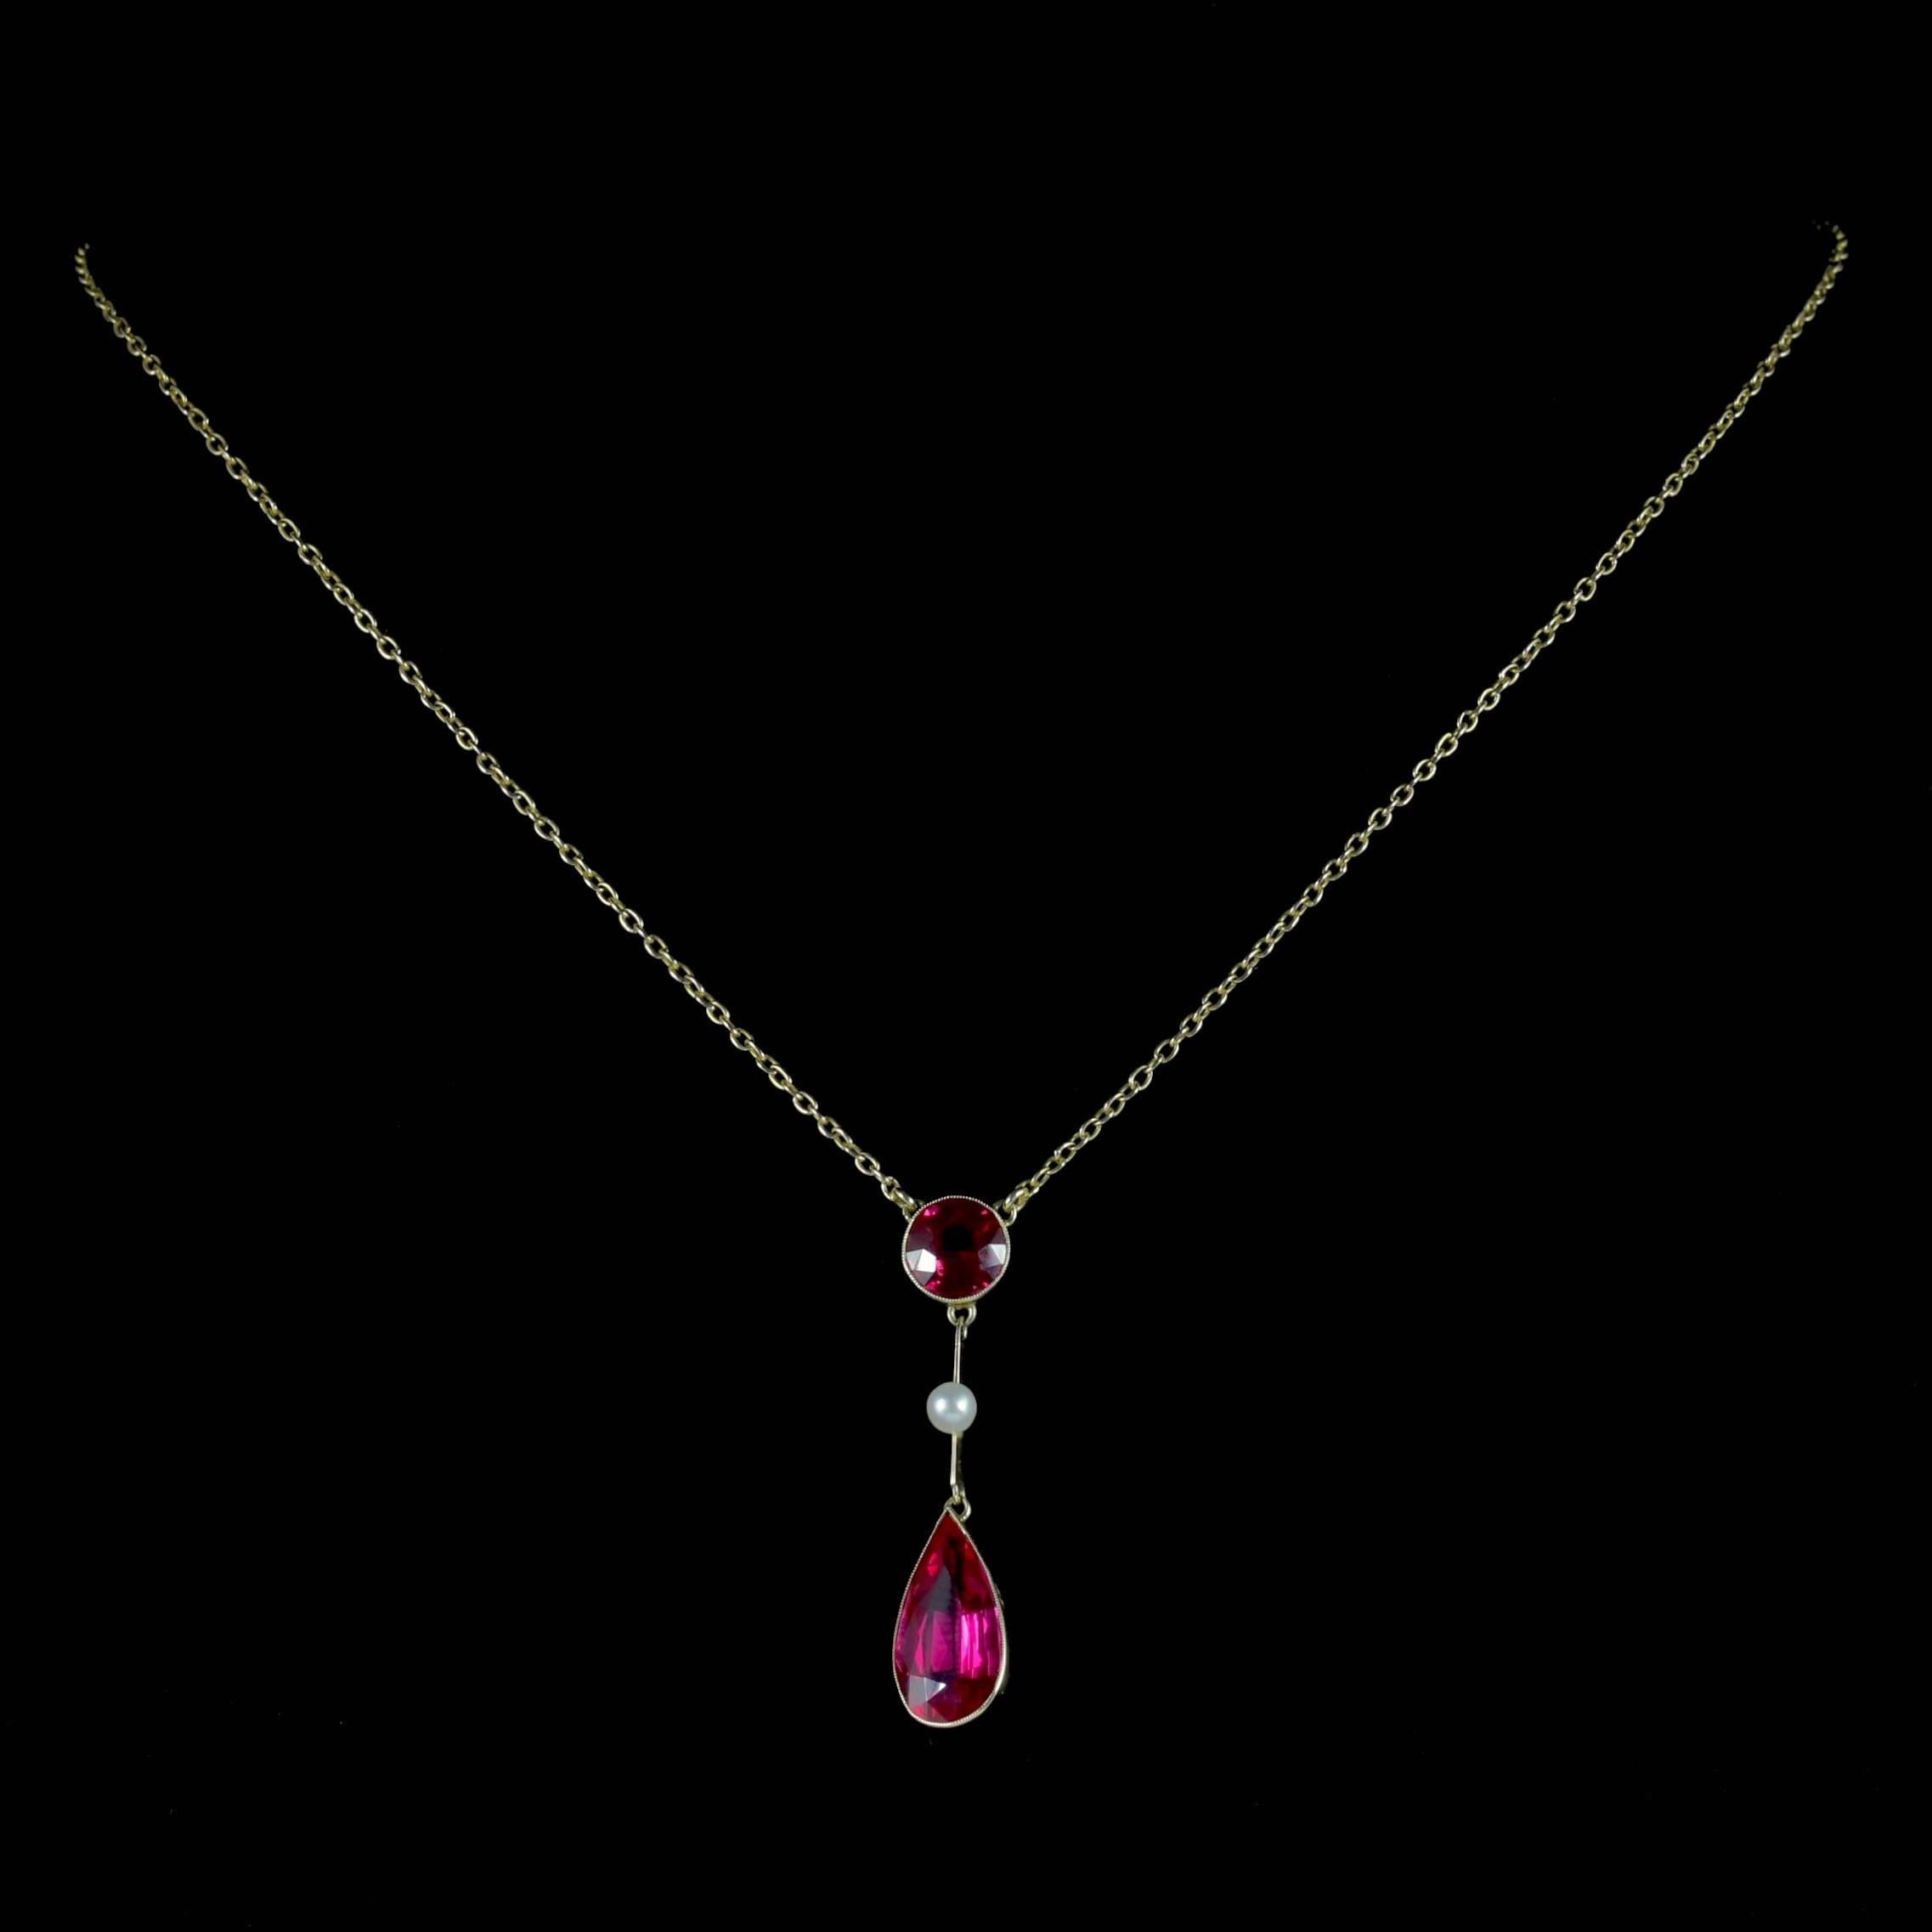 This beautiful antique Ruby and Pearl lavaliere necklace is Victorian Circa 1890. 

The fabulous drop pendant displays a round 1.50ct Ruby at the top leading down to a lovely Pearl and a larger 4ct Ruby in the shape of a teardrop.

Ruby is